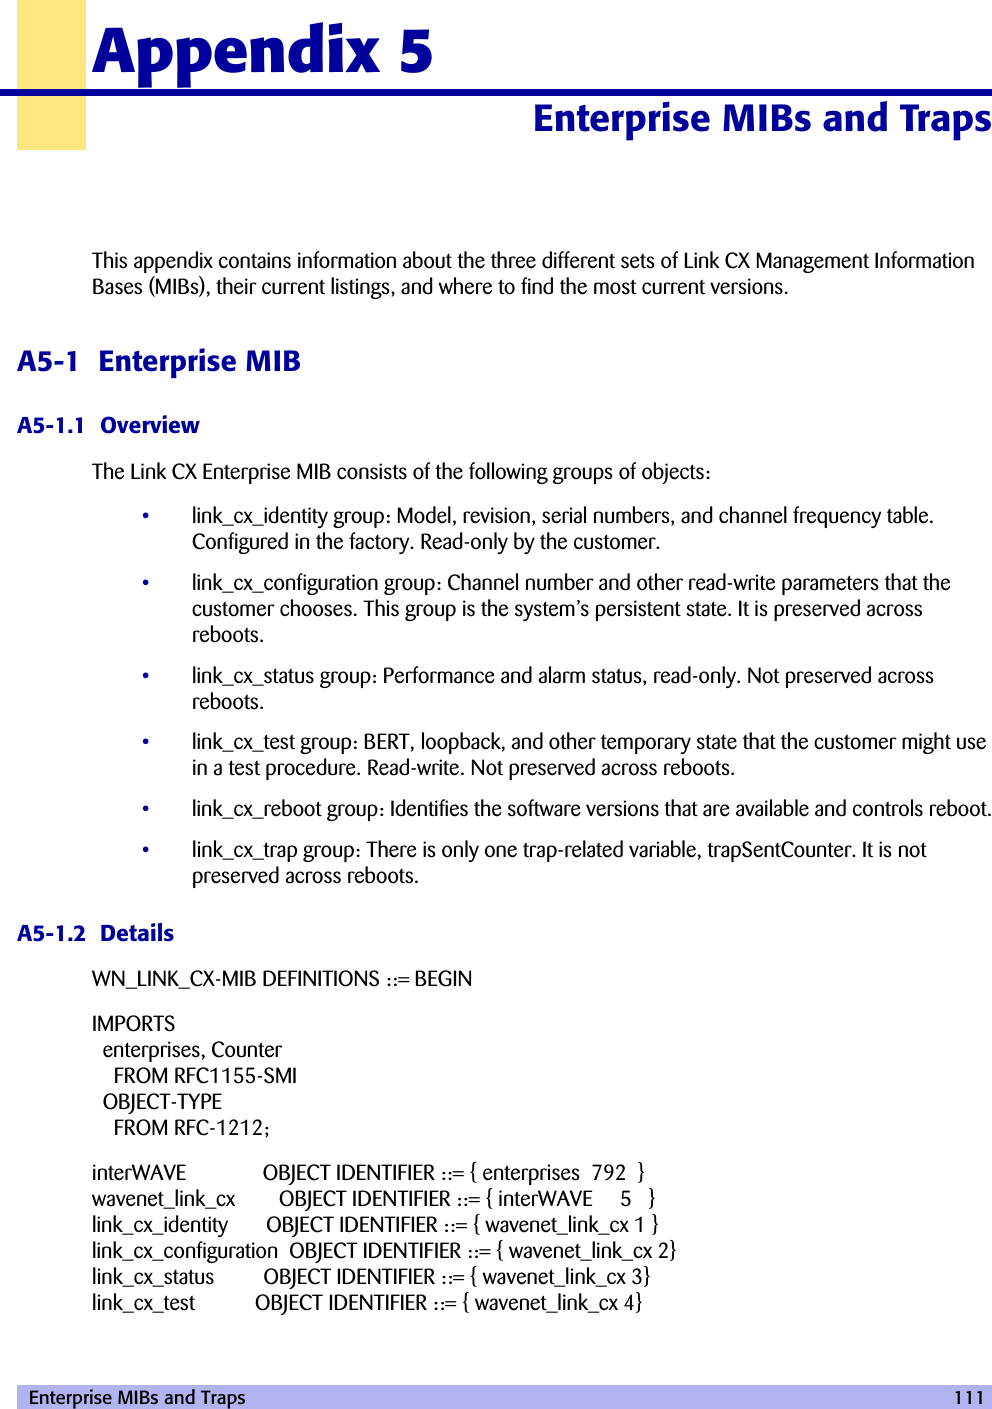  Enterprise MIBs and Traps 111Appendix 5Enterprise MIBs and Traps 50000This appendix contains information about the three different sets of Link CX Management Information Bases (MIBs), their current listings, and where to find the most current versions.A5-1  Enterprise MIBA5-1.1  OverviewThe Link CX Enterprise MIB consists of the following groups of objects:•link_cx_identity group: Model, revision, serial numbers, and channel frequency table. Configured in the factory. Read-only by the customer.•link_cx_configuration group: Channel number and other read-write parameters that the customer chooses. This group is the system’s persistent state. It is preserved across reboots.•link_cx_status group: Performance and alarm status, read-only. Not preserved across reboots.•link_cx_test group: BERT, loopback, and other temporary state that the customer might use in a test procedure. Read-write. Not preserved across reboots.•link_cx_reboot group: Identifies the software versions that are available and controls reboot.•link_cx_trap group: There is only one trap-related variable, trapSentCounter. It is not preserved across reboots.A5-1.2  DetailsWN_LINK_CX-MIB DEFINITIONS ::= BEGINIMPORTSenterprises, CounterFROM RFC1155-SMIOBJECT-TYPEFROM RFC-1212;interWAVE OBJECT IDENTIFIER ::= { enterprises 792 }wavenet_link_cx  OBJECT IDENTIFIER ::= { interWAVE 5 }link_cx_identity OBJECT IDENTIFIER ::= { wavenet_link_cx 1 }link_cx_configuration OBJECT IDENTIFIER ::= { wavenet_link_cx 2}link_cx_status OBJECT IDENTIFIER ::= { wavenet_link_cx 3}link_cx_test OBJECT IDENTIFIER ::= { wavenet_link_cx 4}